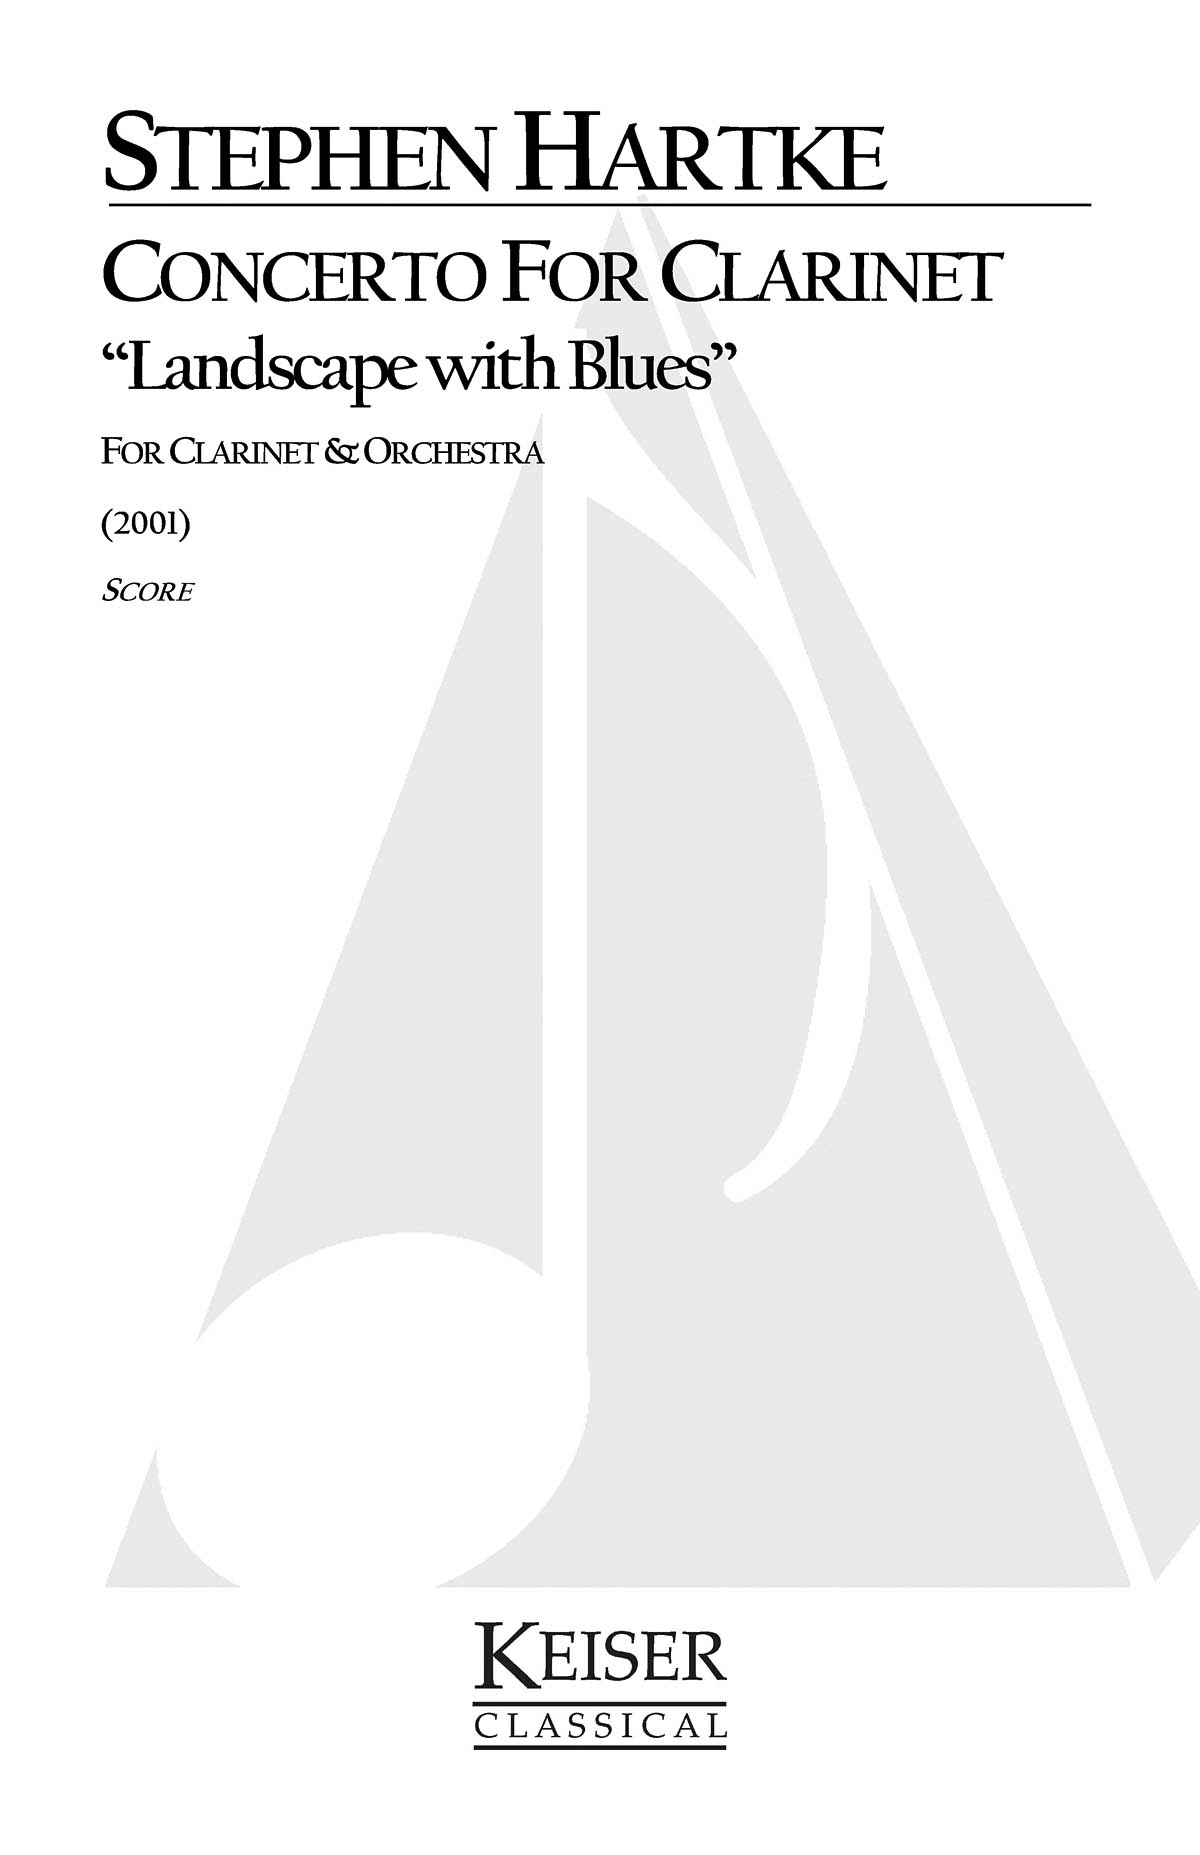 Stephen Hartke: Concerto for Clarinet: Landscape with Blues: Orchestra: Score